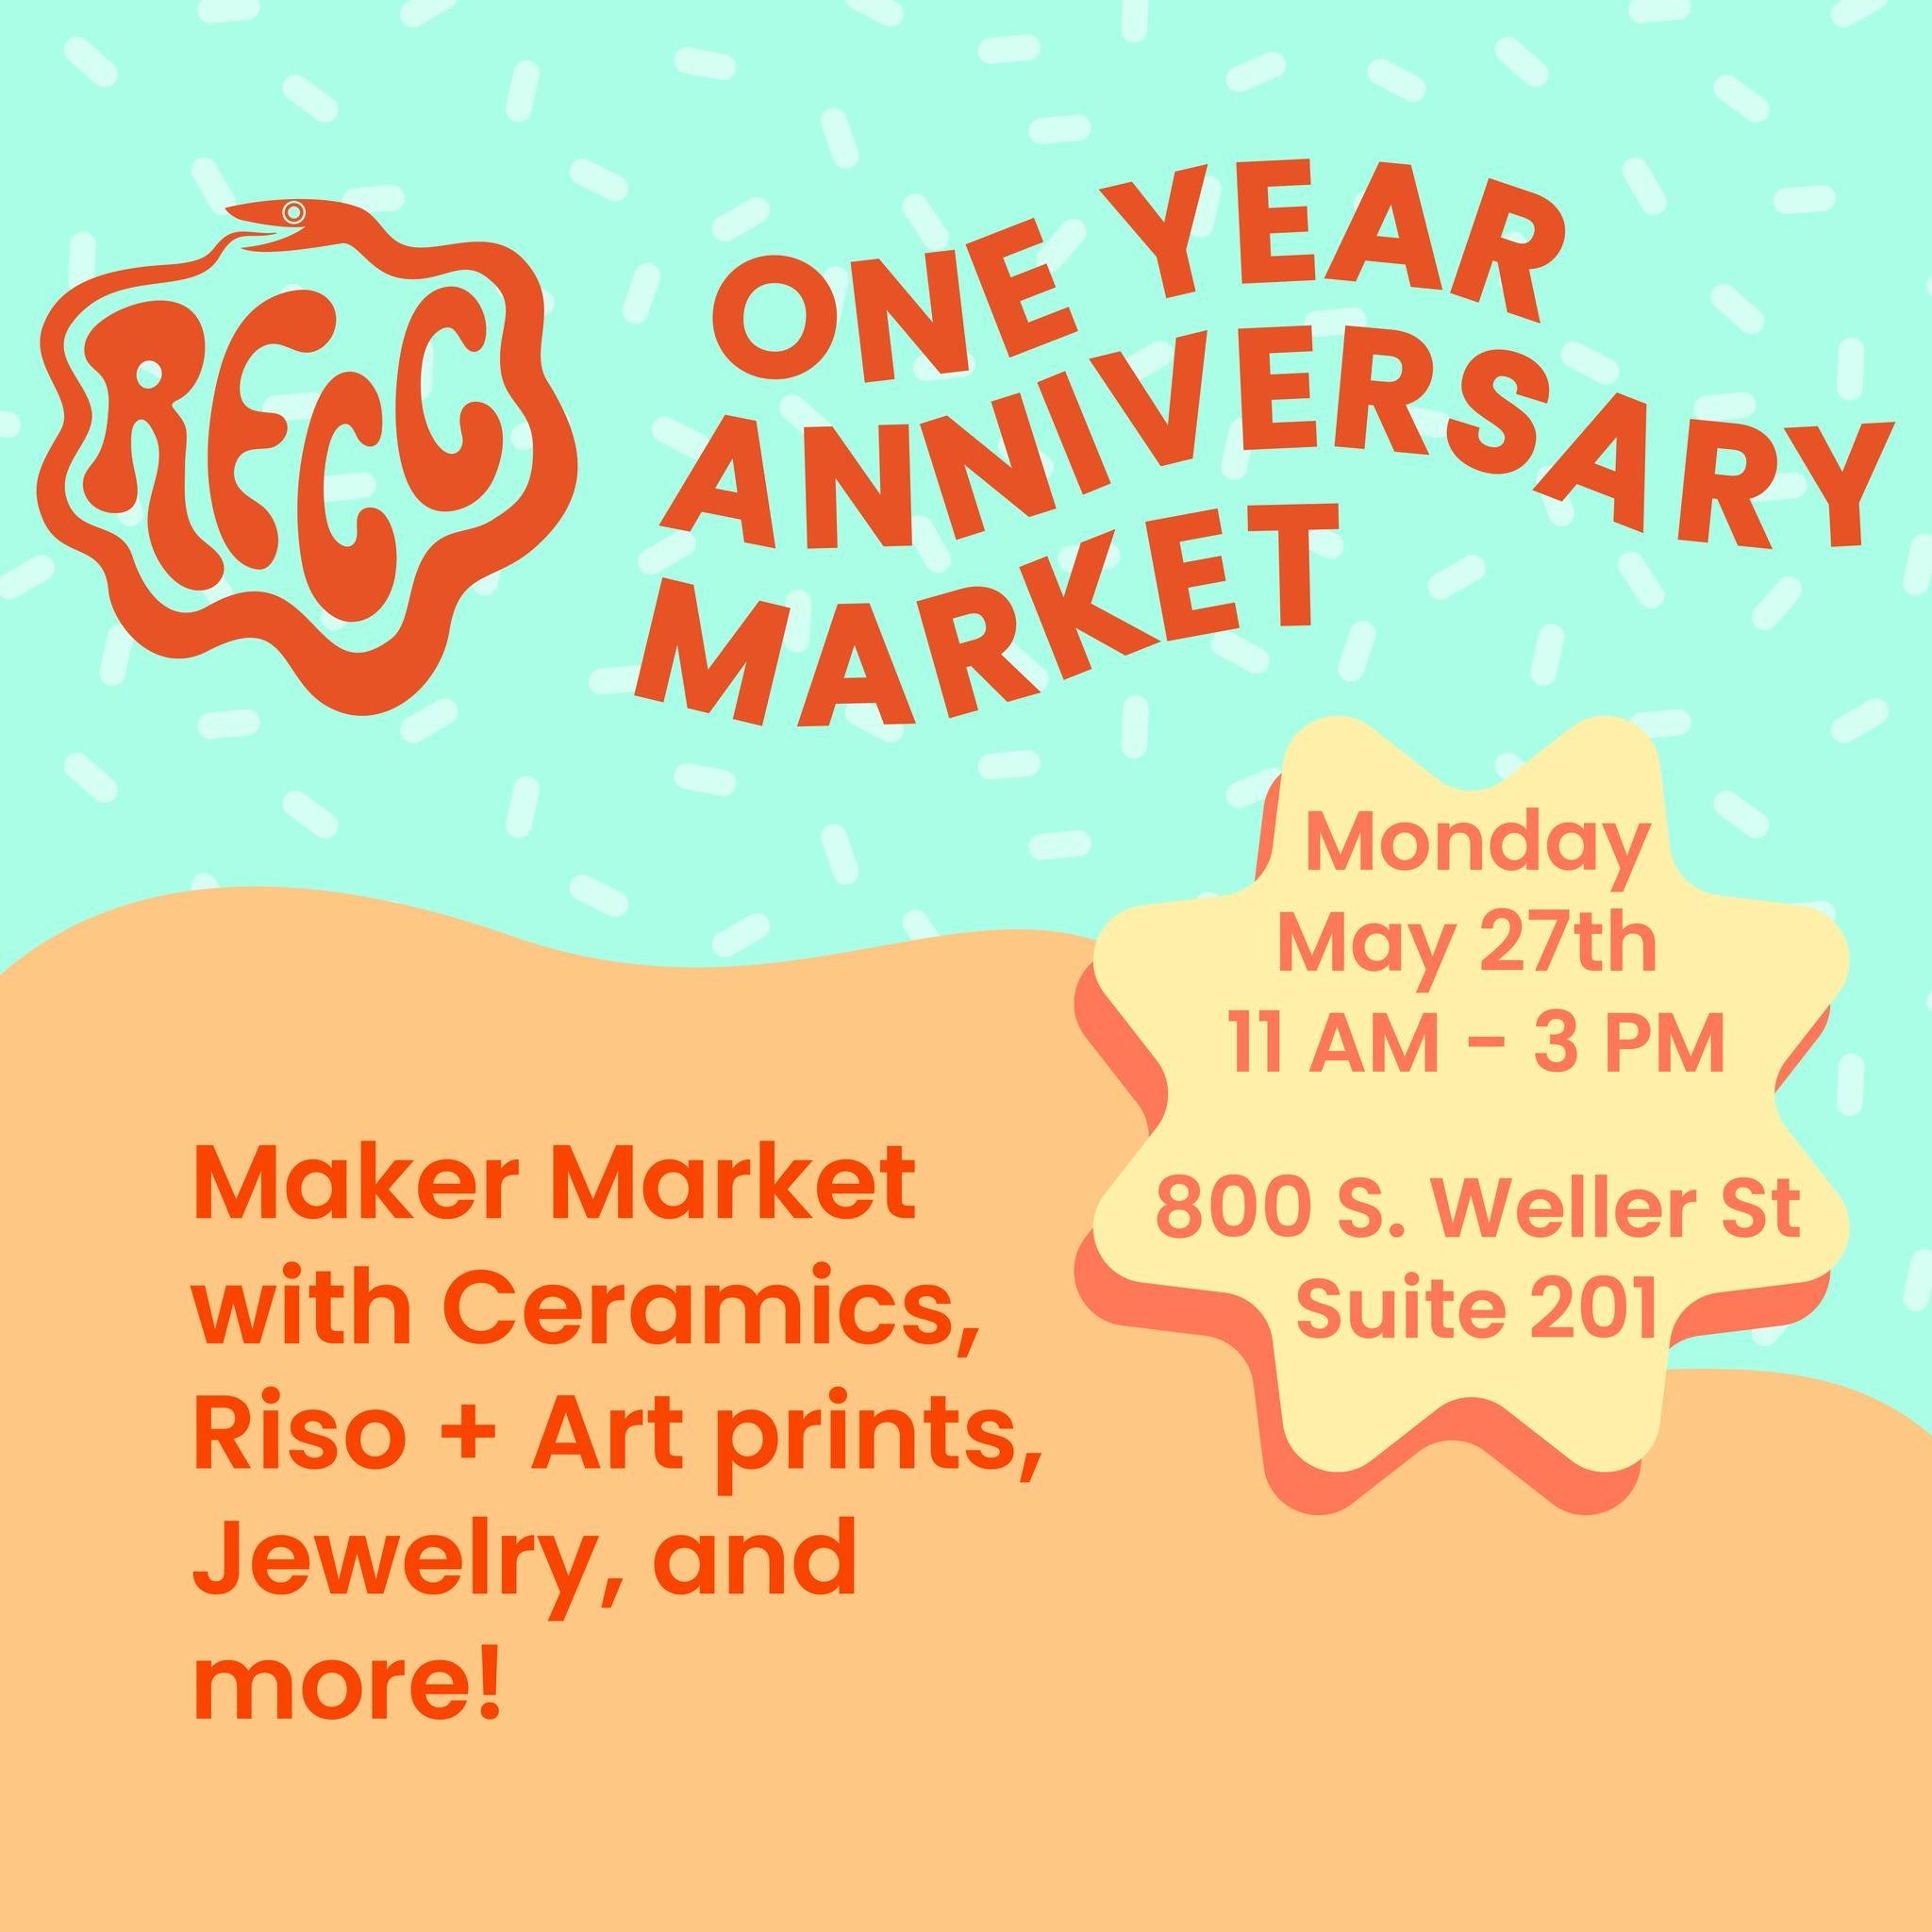 We'll be at the Reclaim Clay Collective One Year Anniversary Market on May 27th, Memorial Day! Come check out the space, and browse handmade goods created by studio members, teachers, and artists in our community! Plus we will be selling RECC studio 